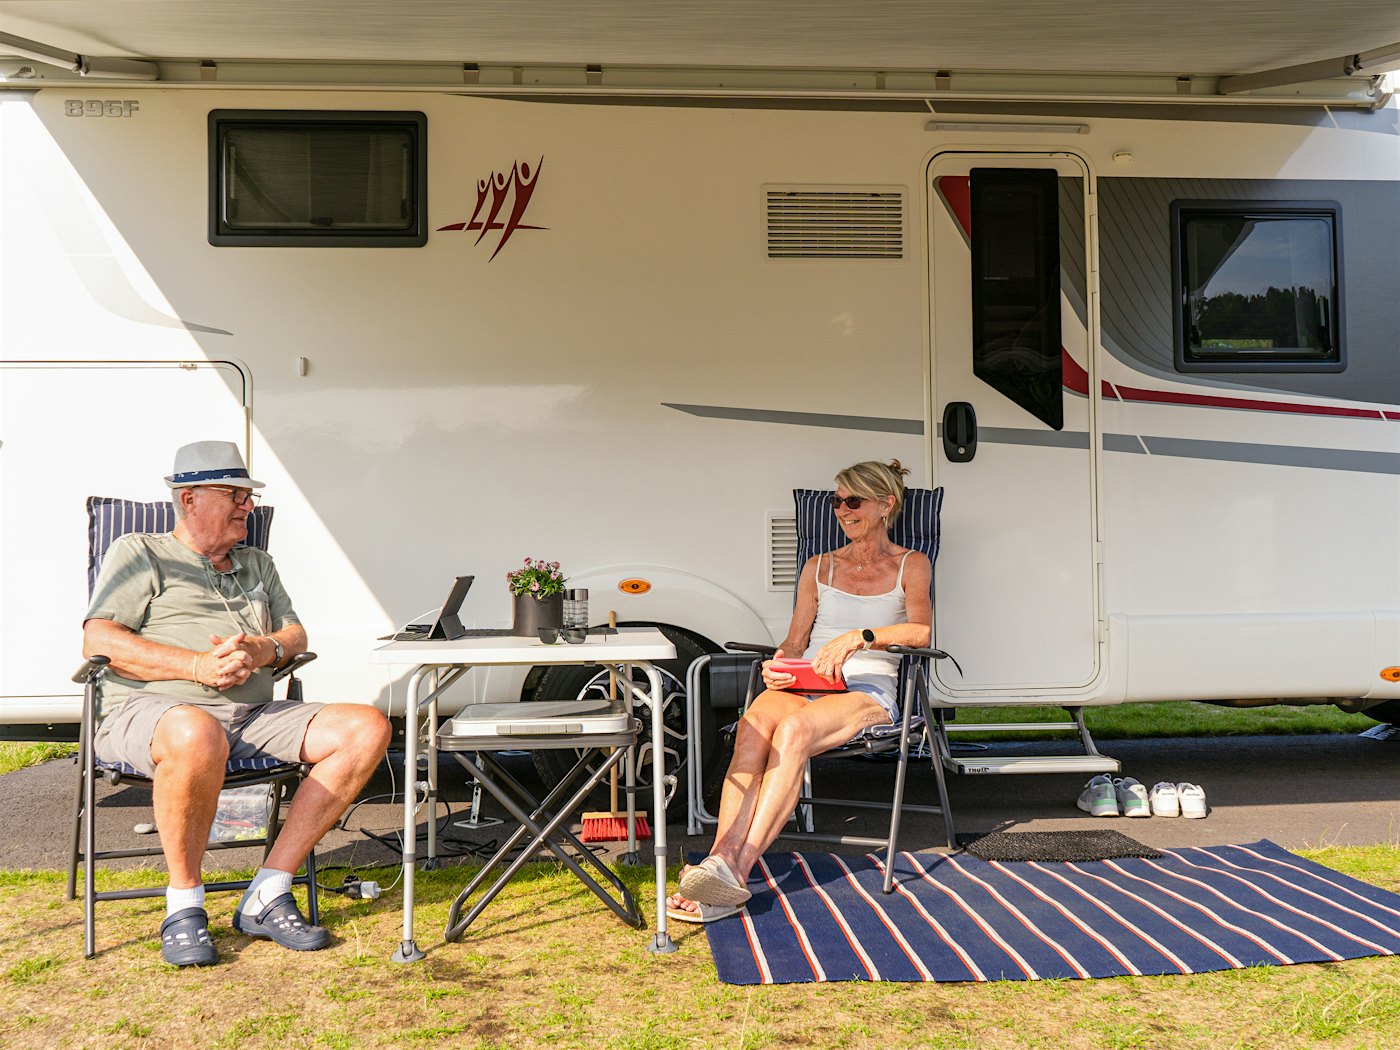 Man and woman relaxing in front of motorhome. Photo